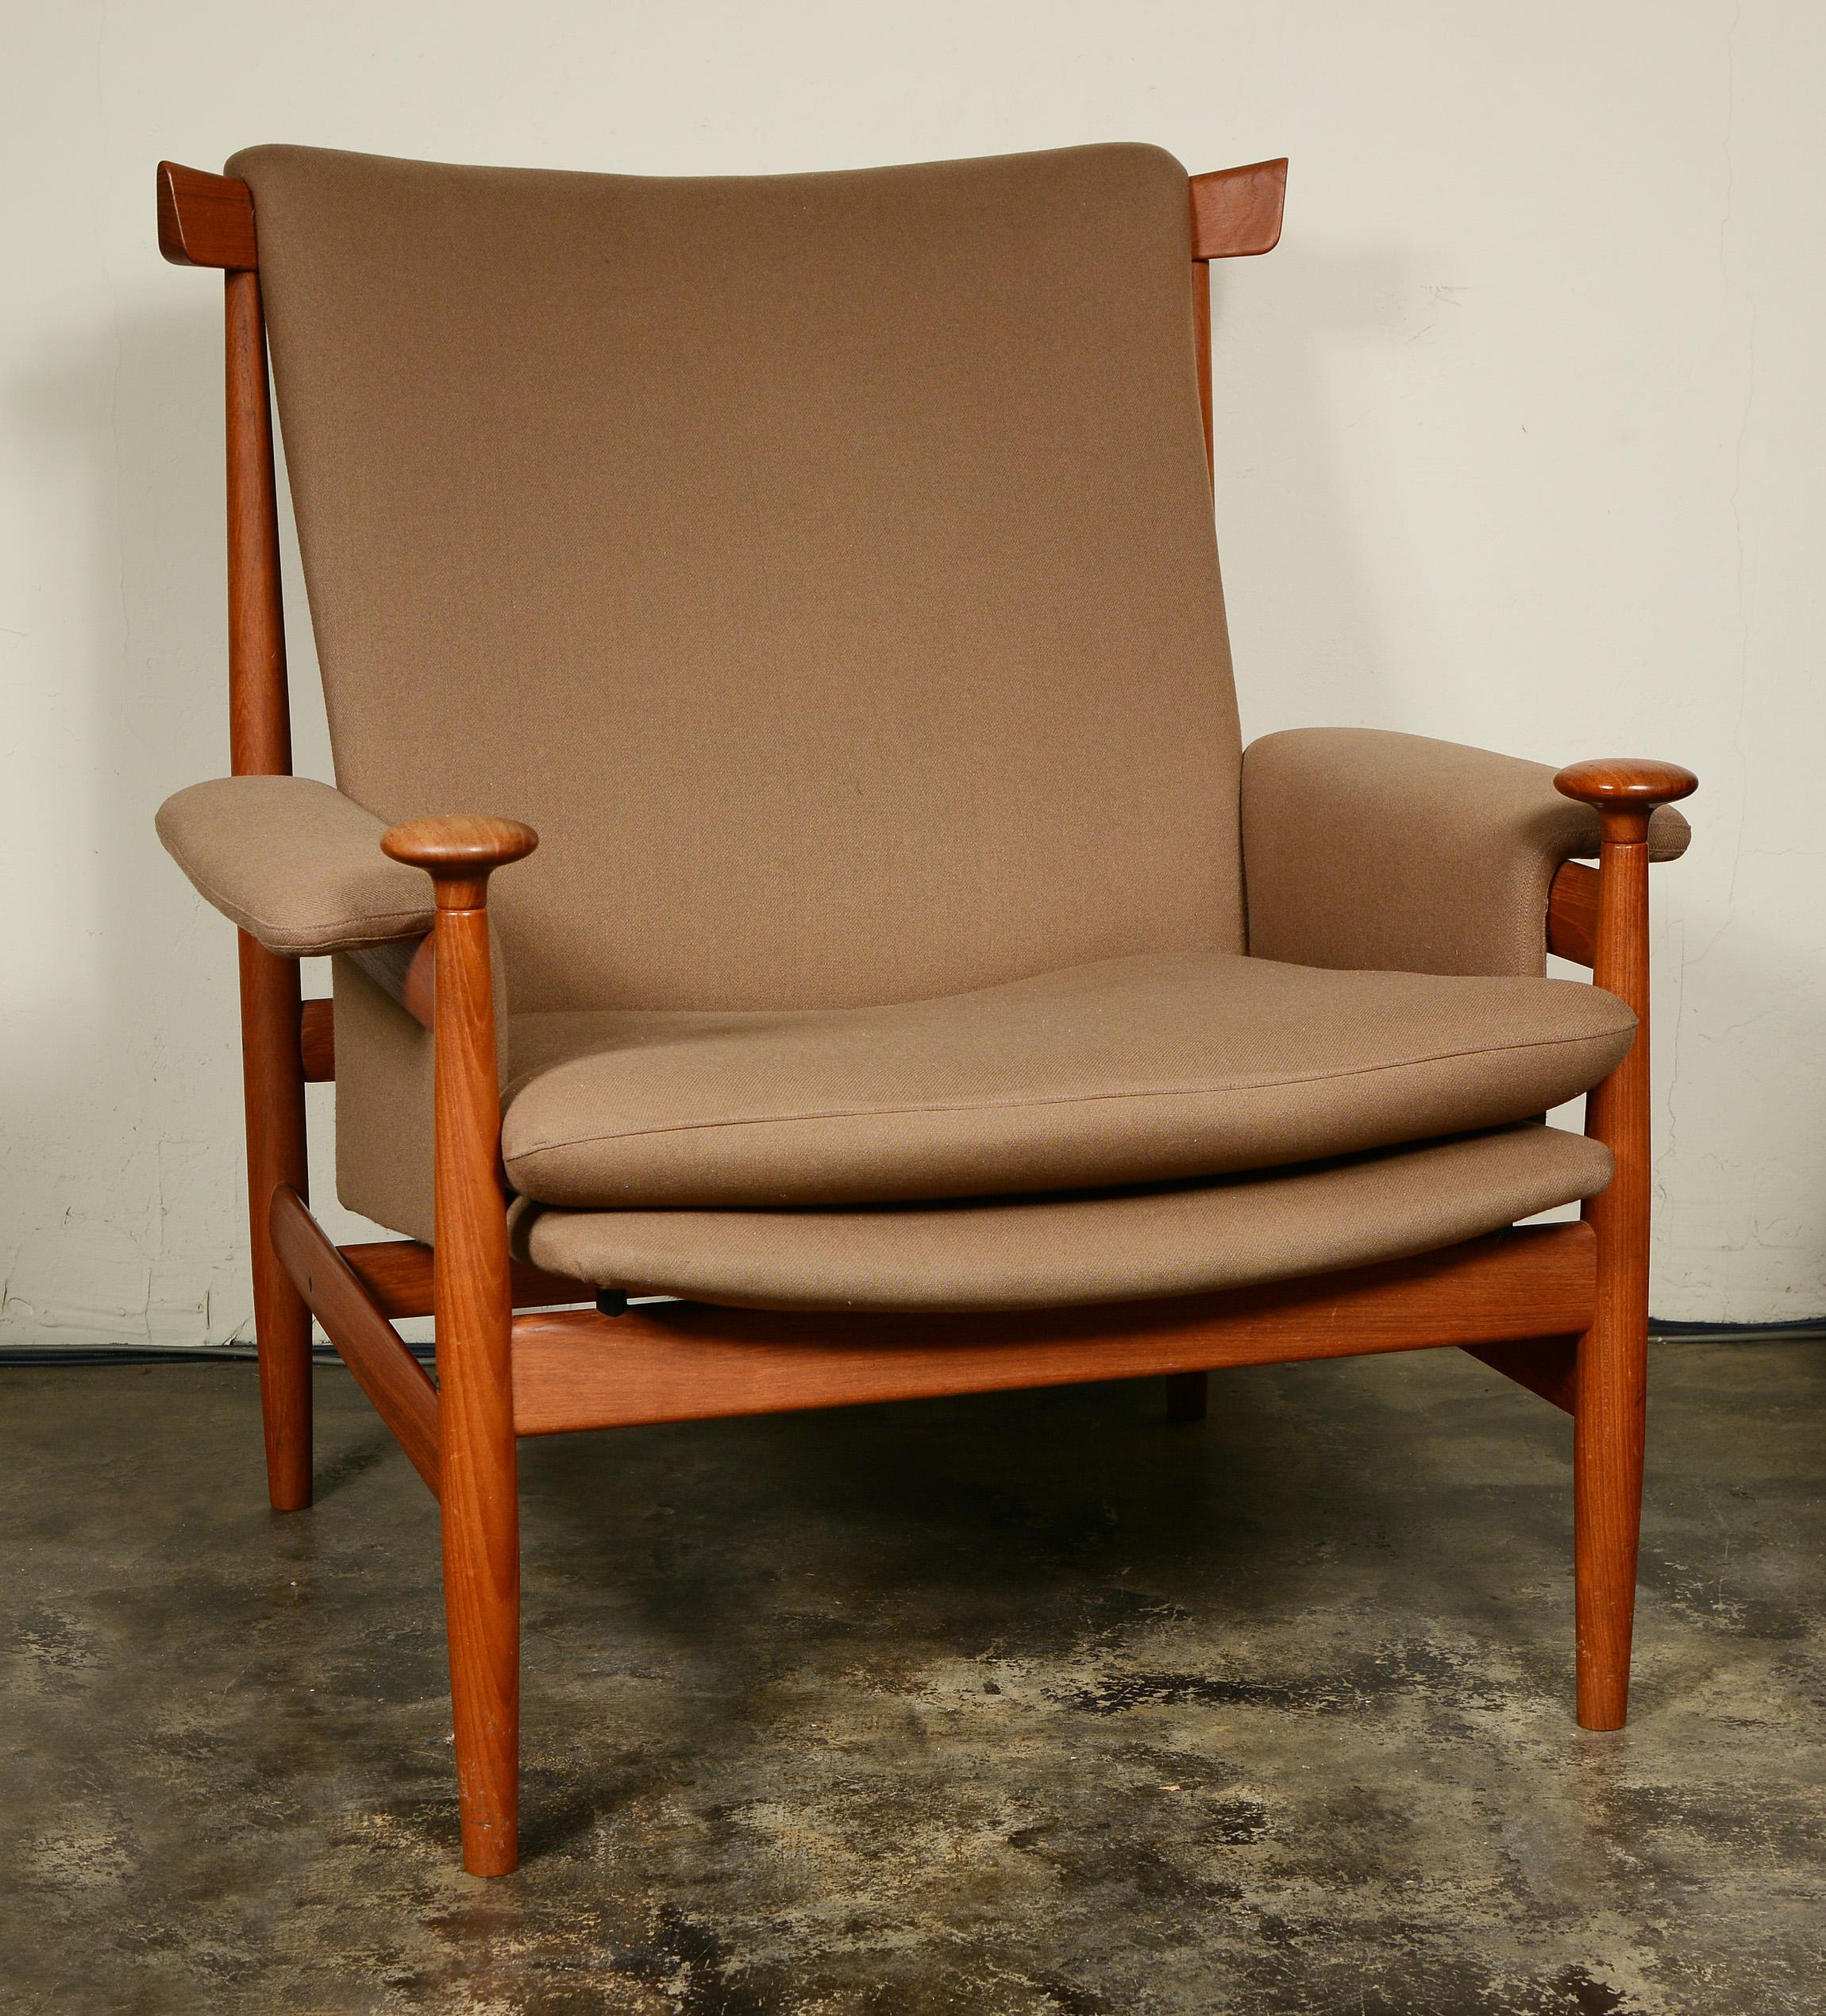 Bwana lounge chair designed by Finn Juhl for France and Son. The chair has a curved top back rail with finger joints attaching the rail parts. The front legs terminate with sculpted hand rests. The chair has both the France and Son and John Stewart